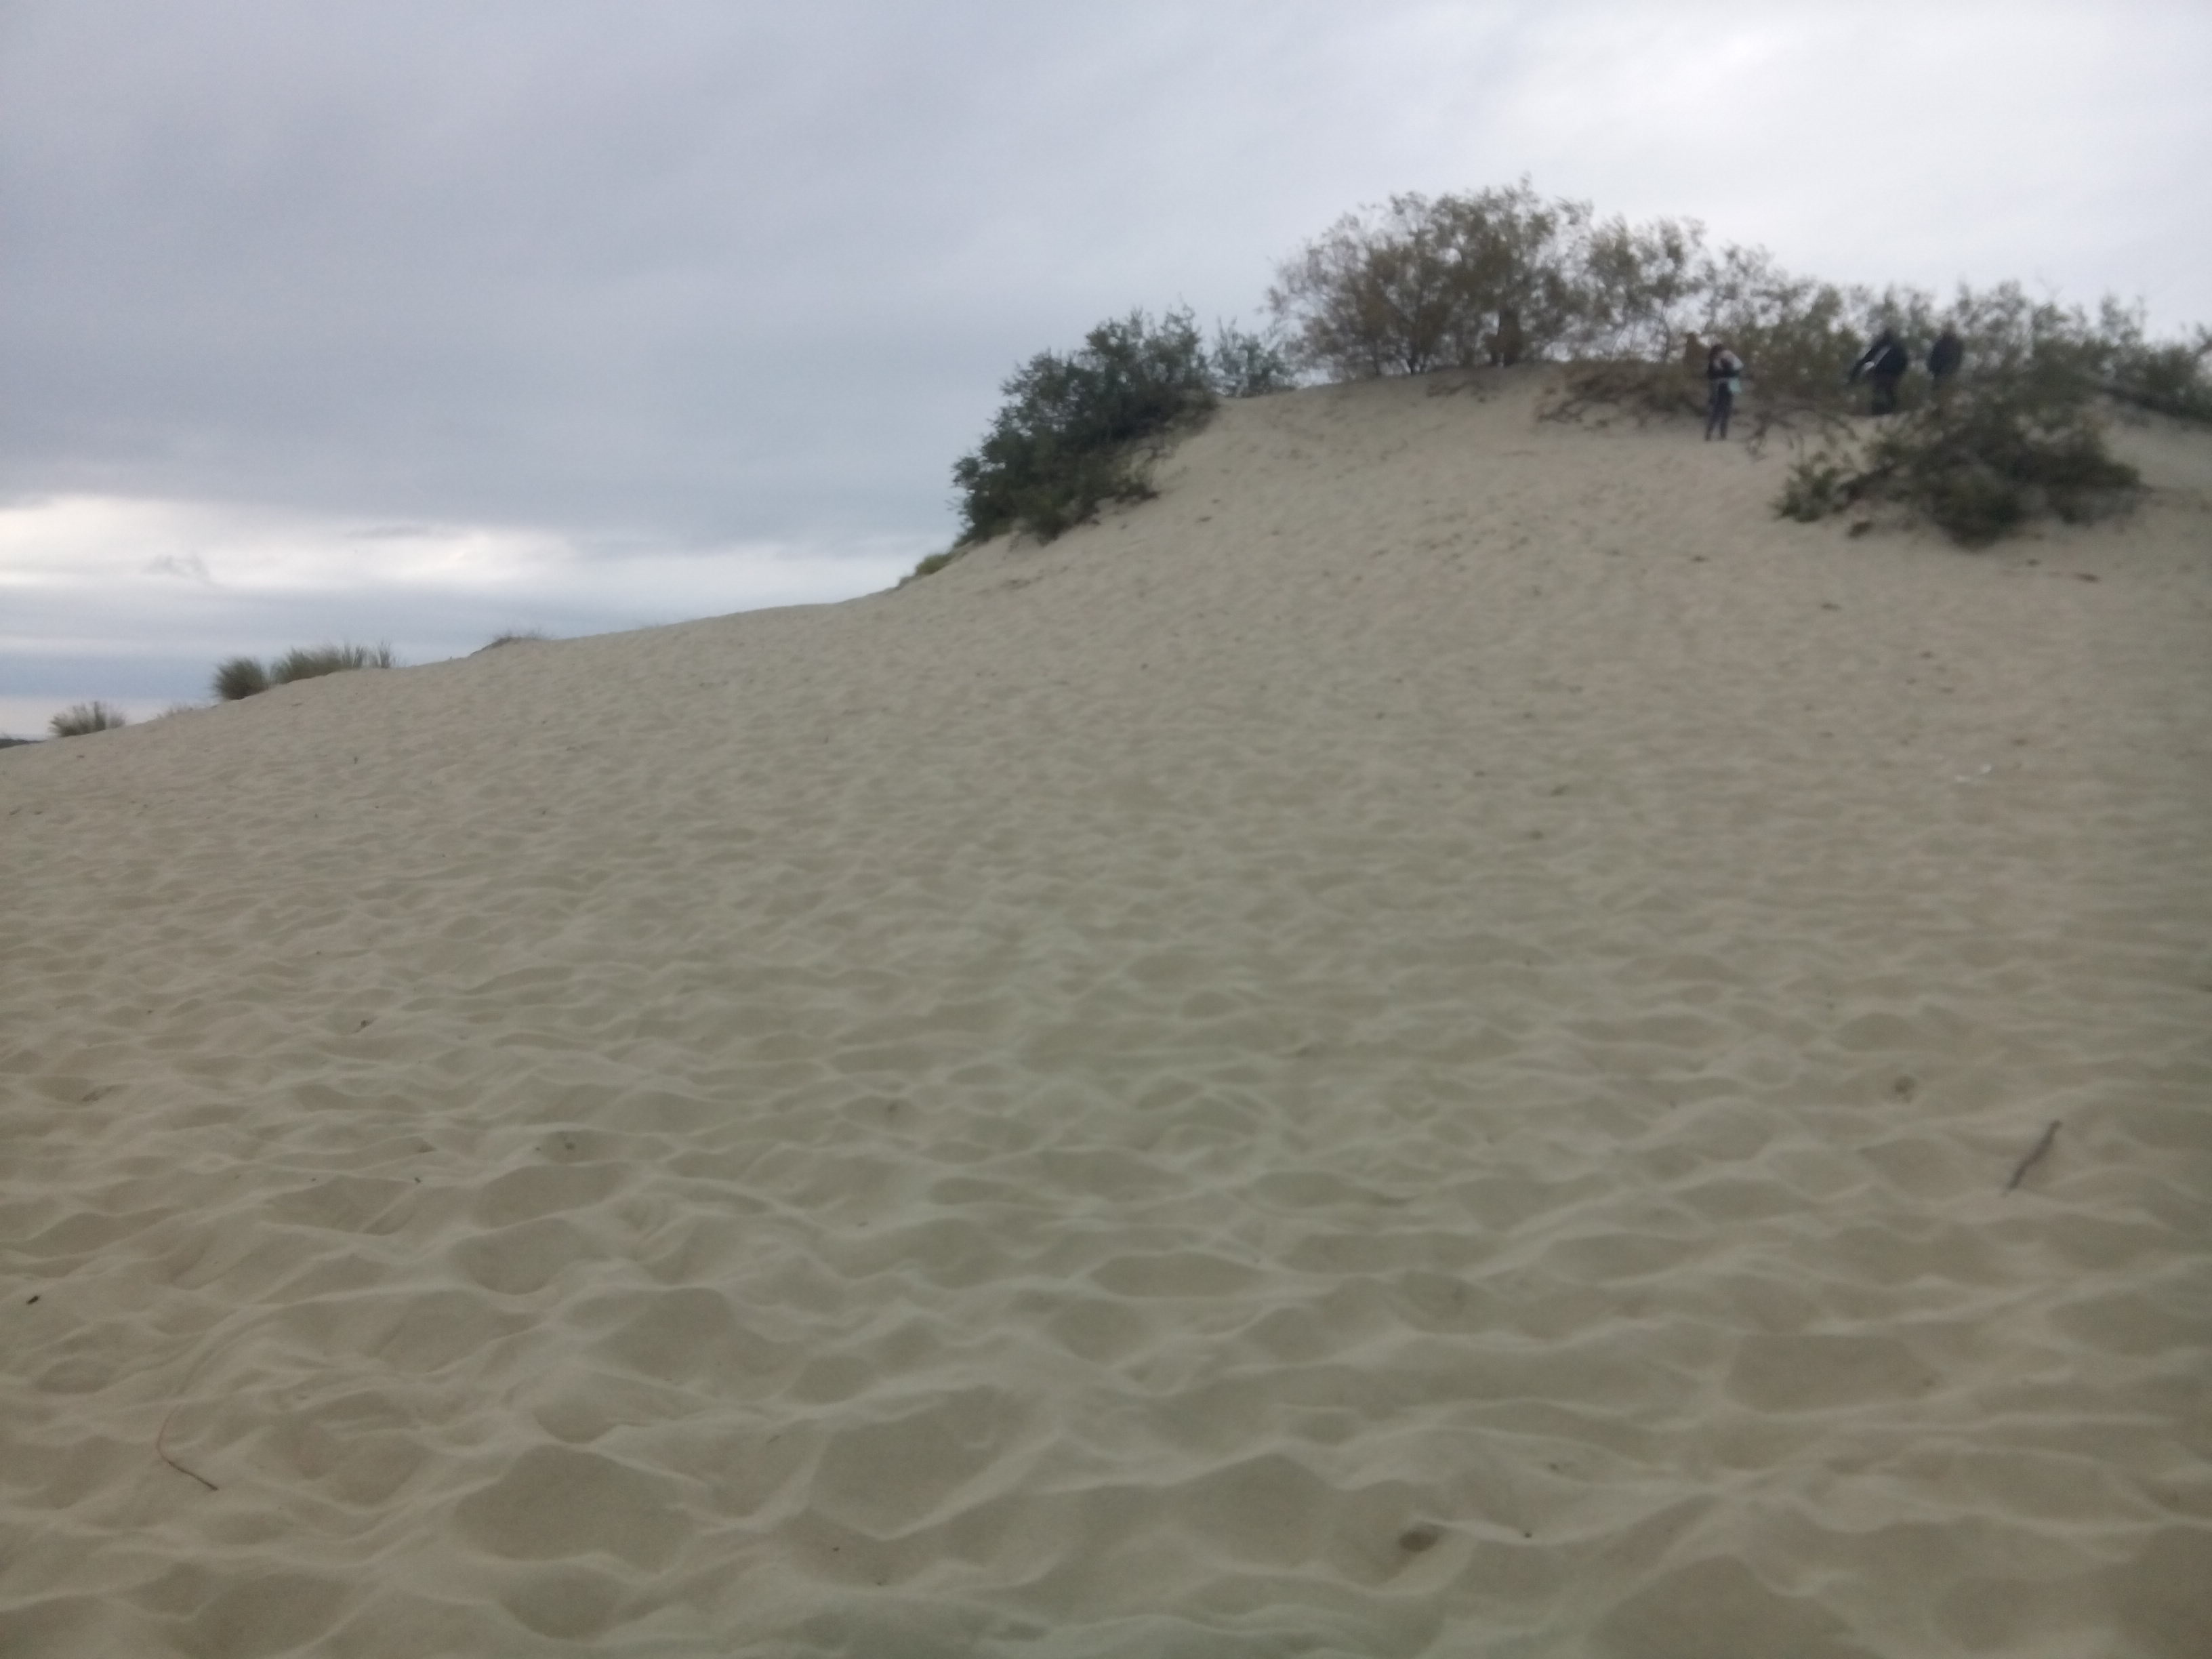 An expanse of soft sand reaches a peak with small trees